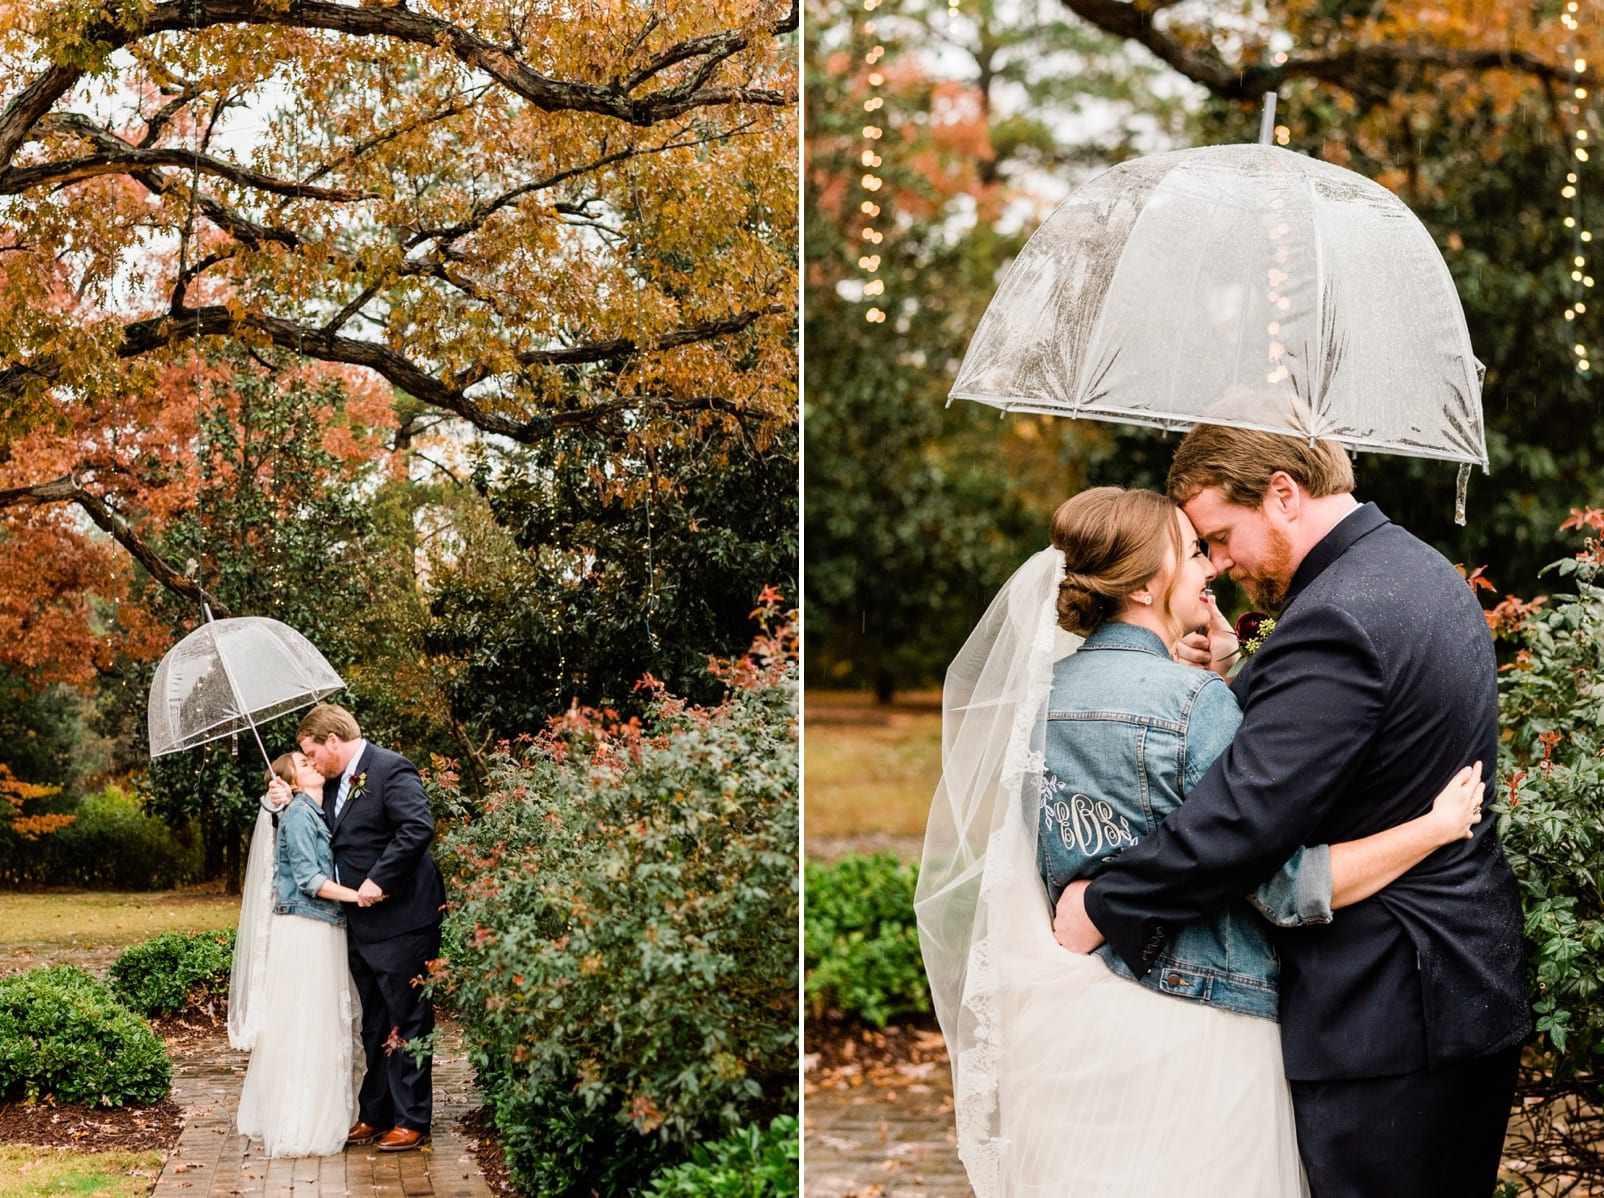 Sutherland Estate outdoor wedding portraits in the rain under a clear umbrella and bride wearing a jean jacket photo